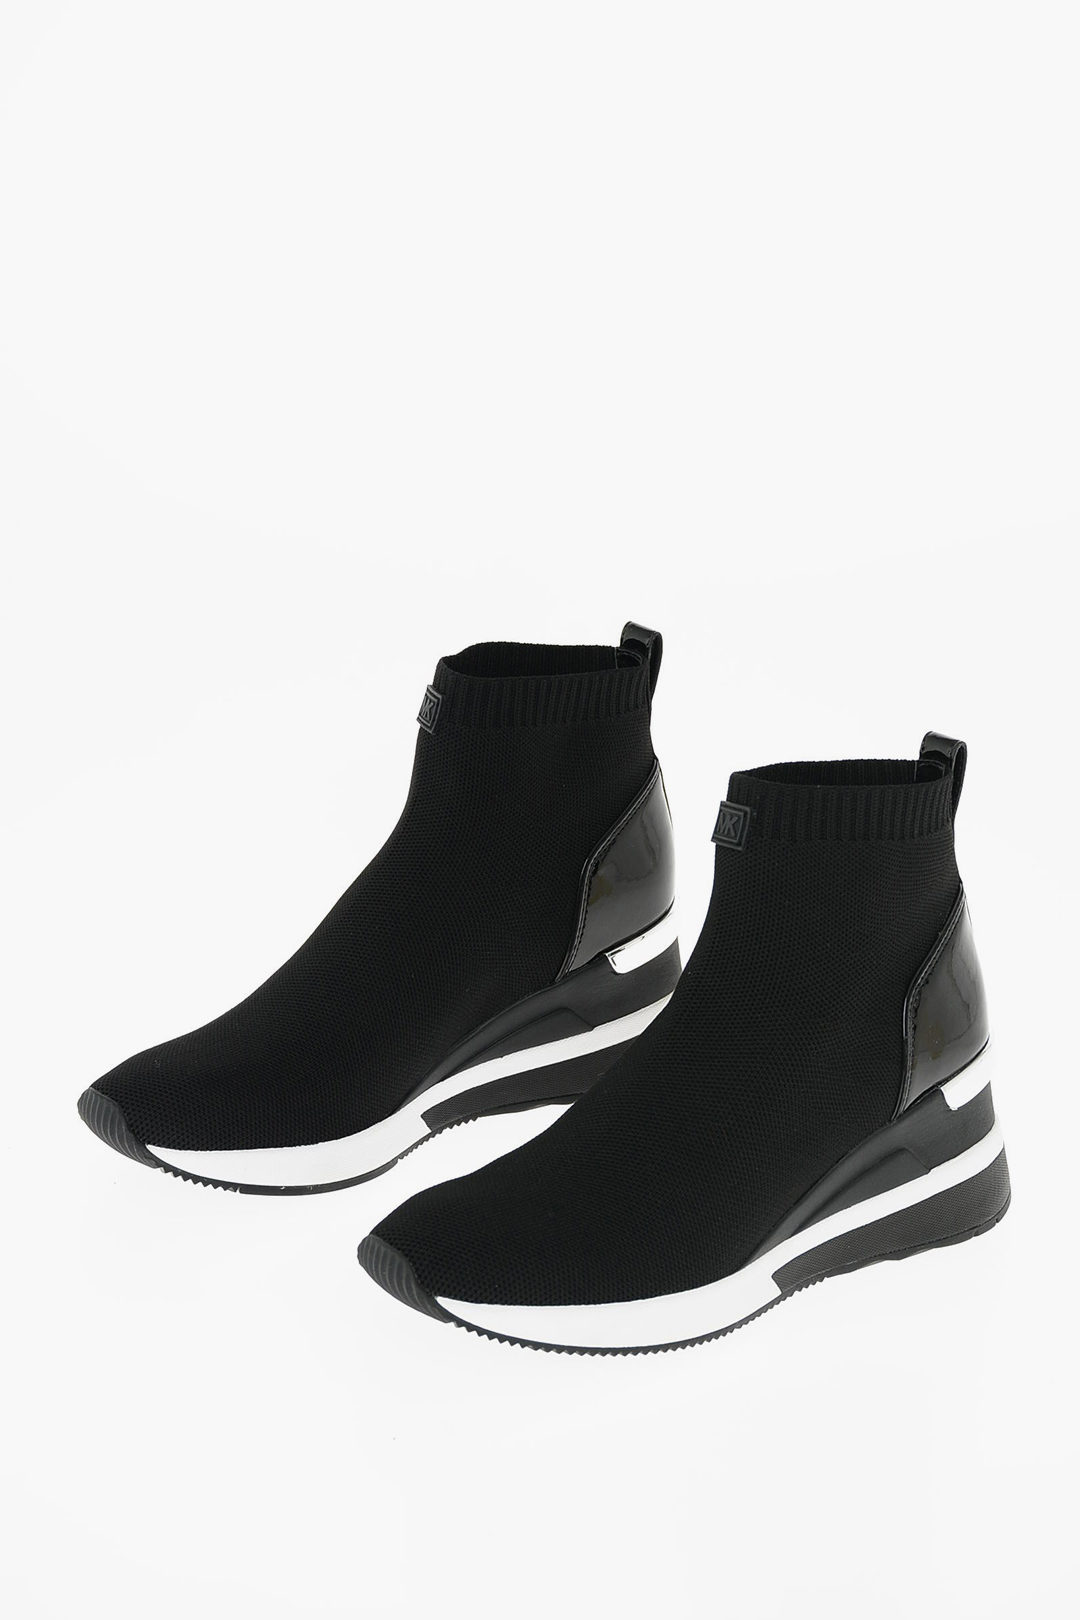 Michael Kors SKYLER Sock Sneakers with Rubber Sole women - Glamood Outlet